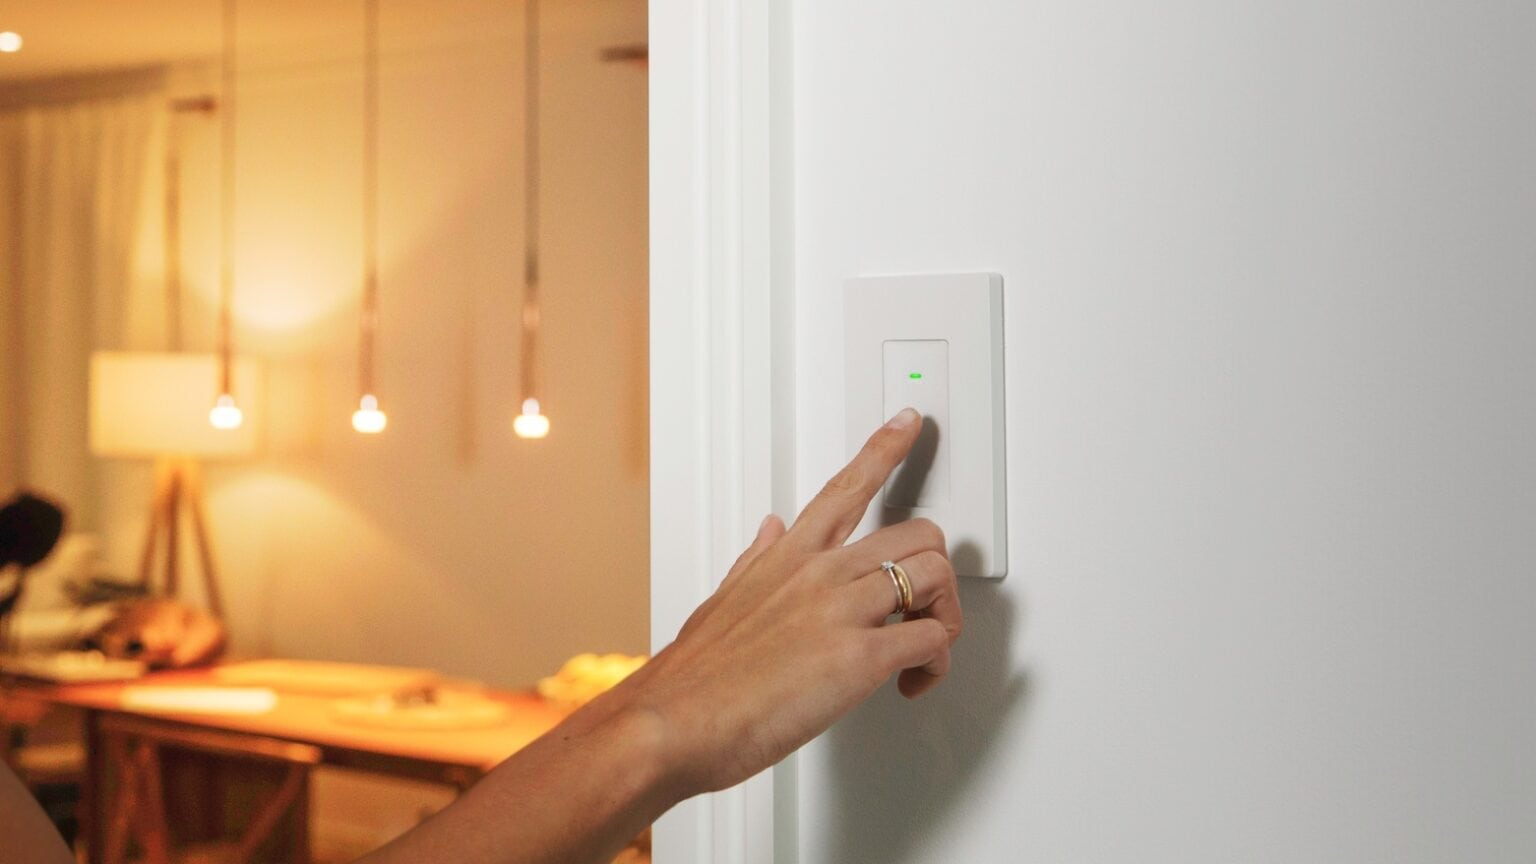 New Eve Light Switch for HomeKit embraces latest smart-home standards